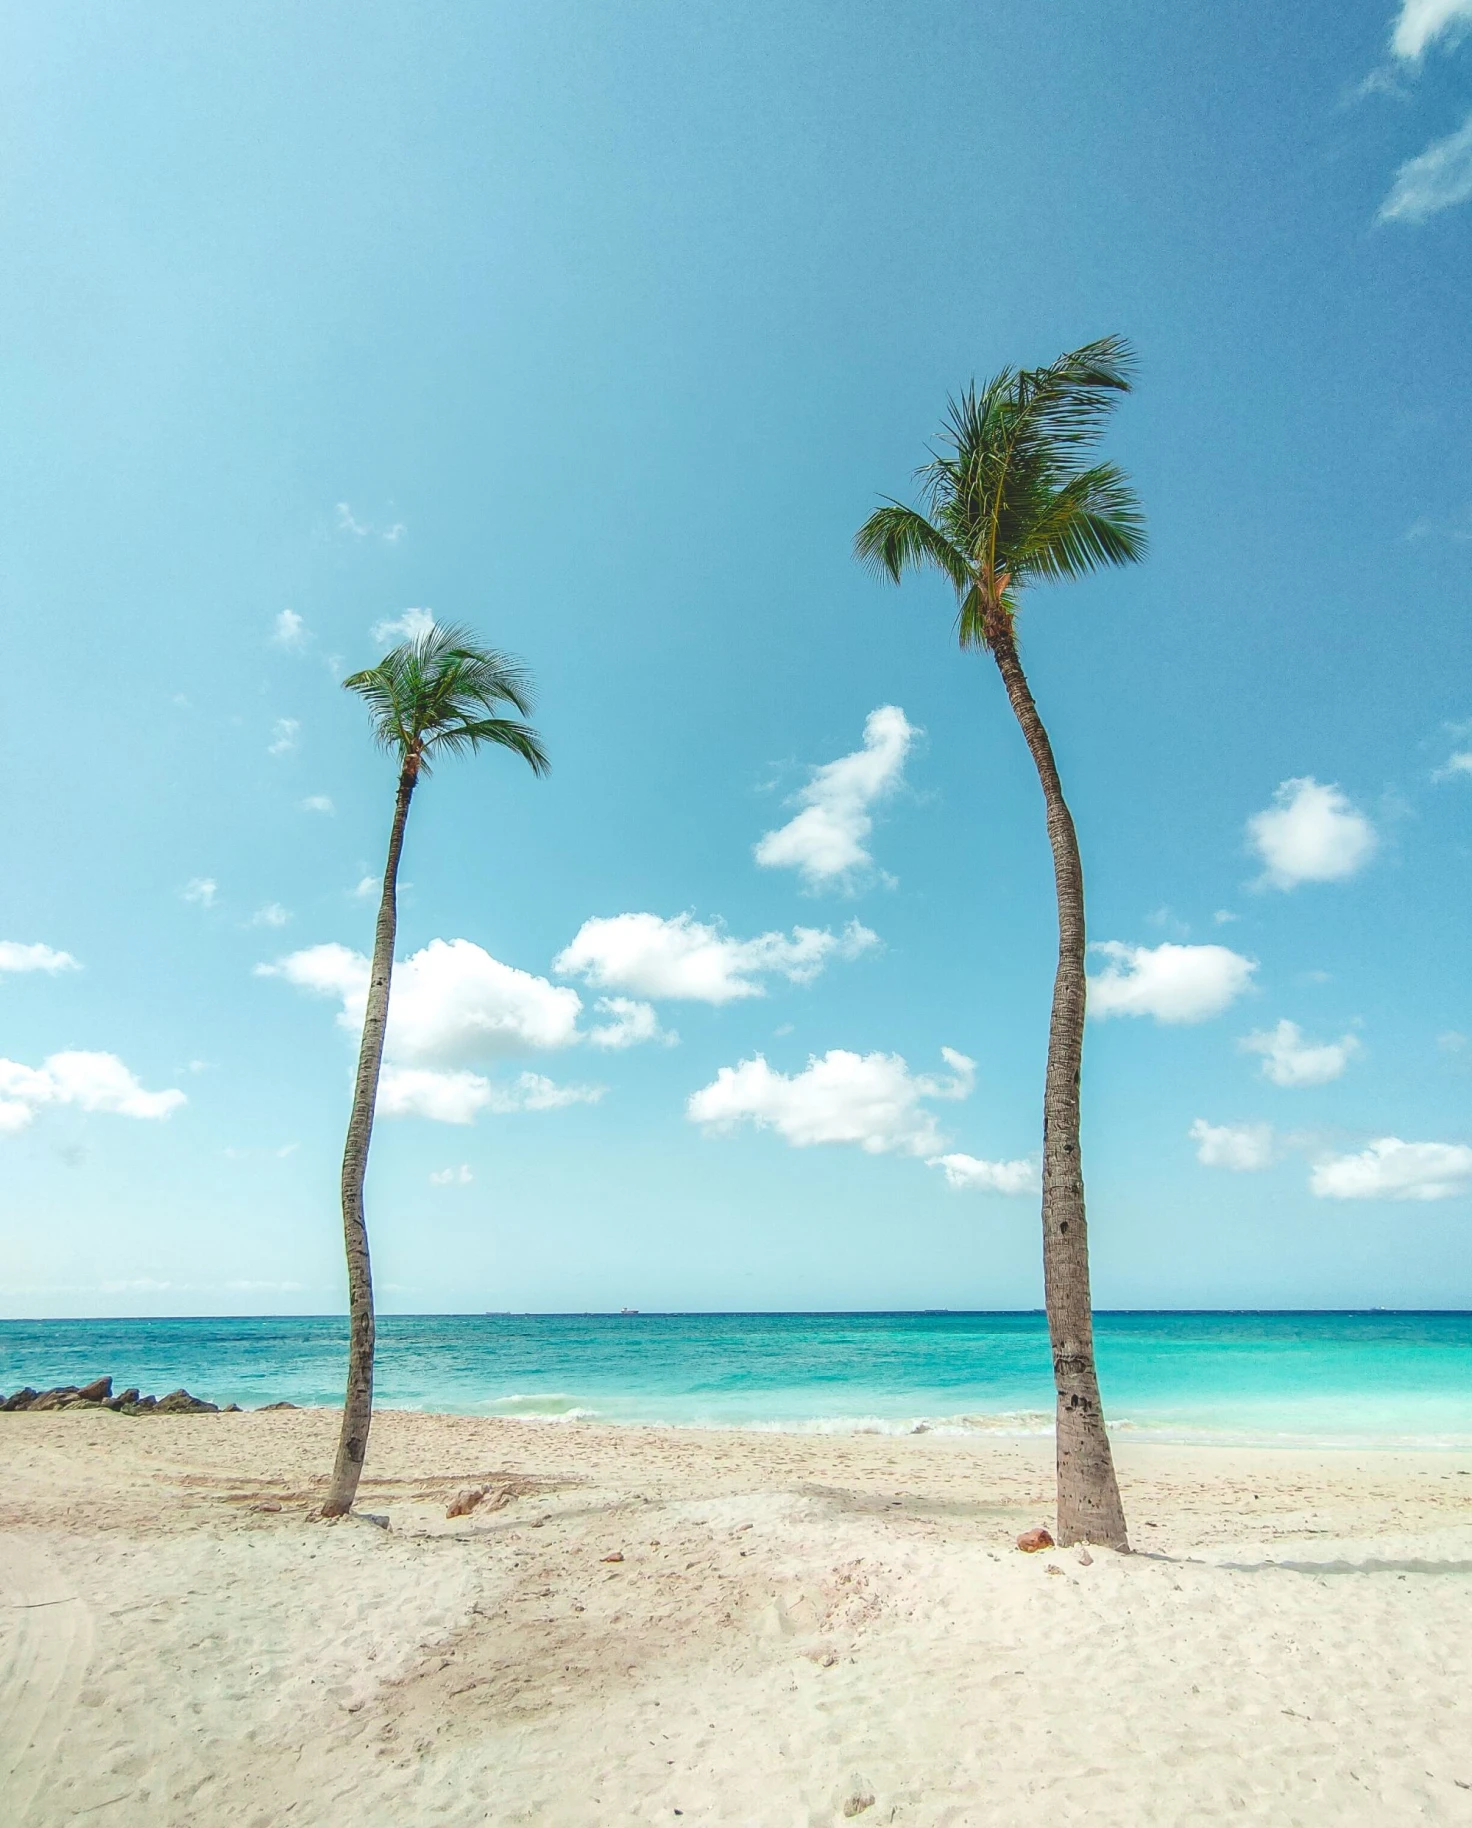 two palm trees on the beach